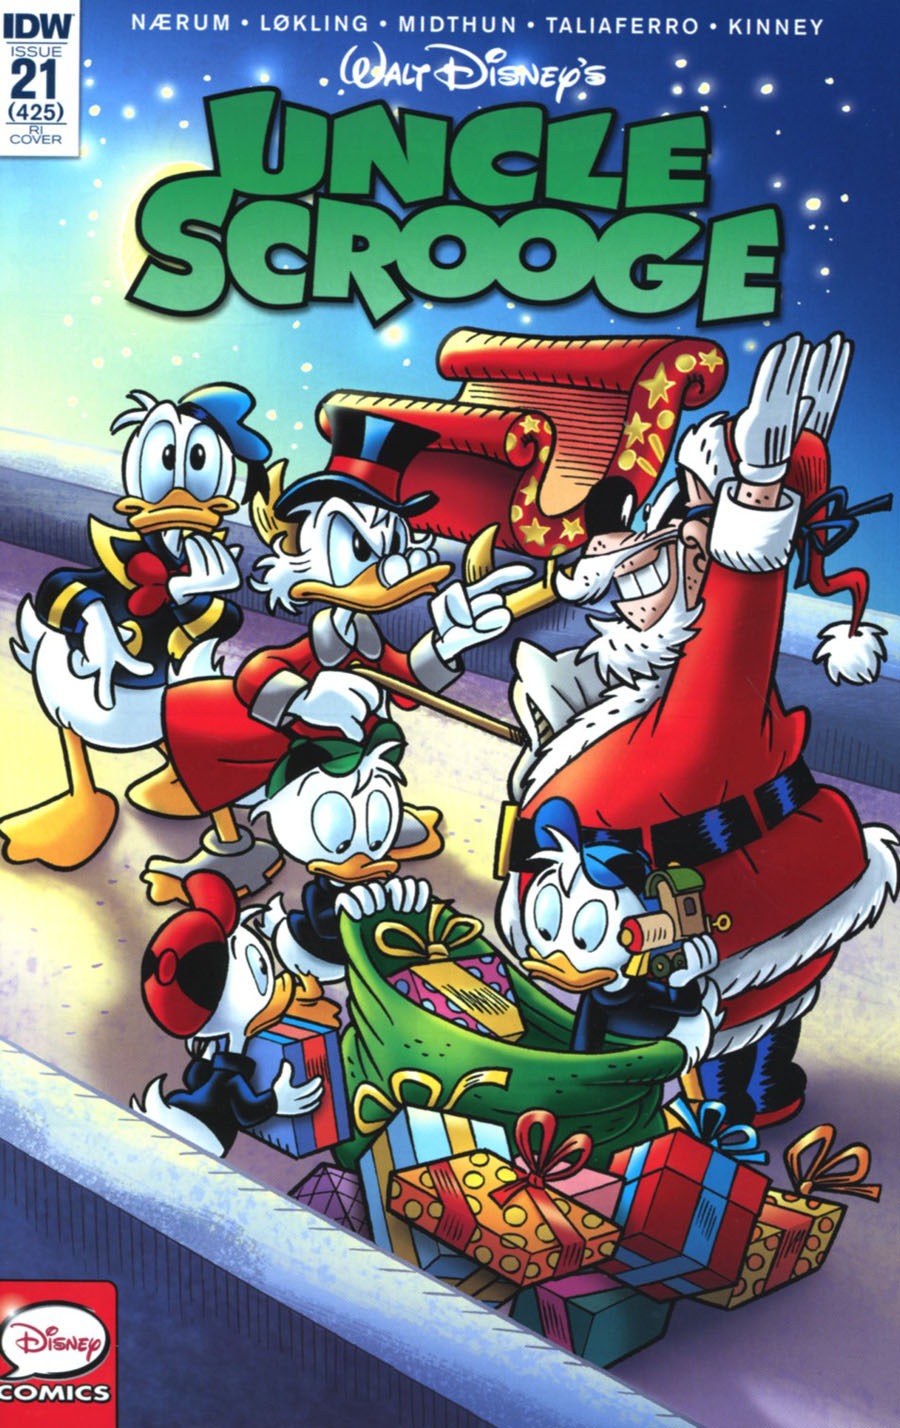 Uncle Scrooge Vol 2 #21 Cover C Incentive Marco Gervasio Variant Cover